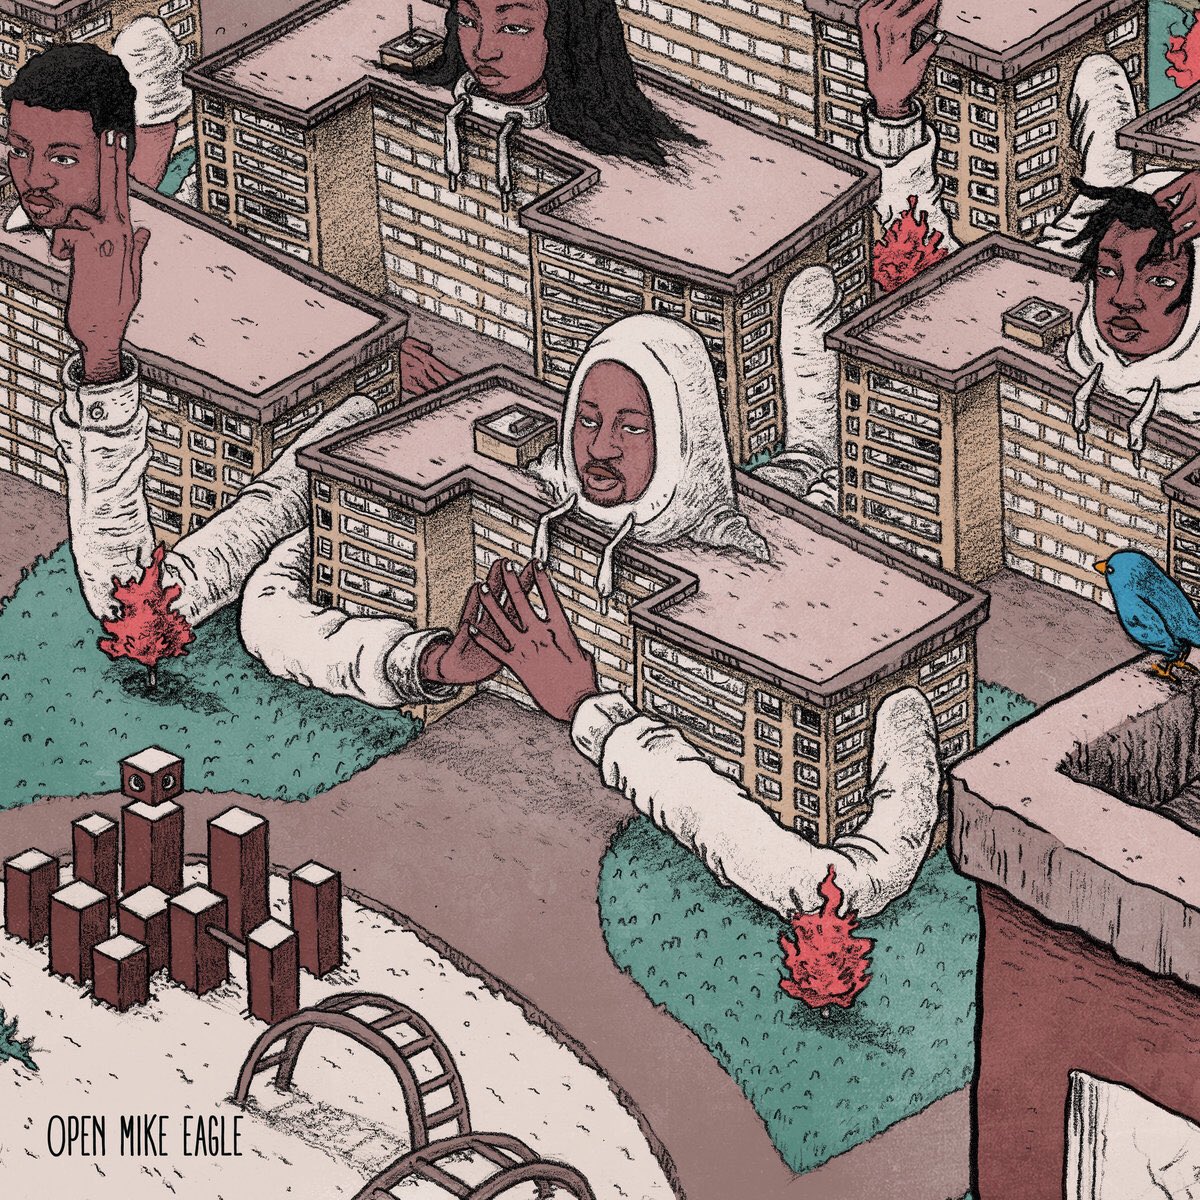 38. Open Mike Eagle - BBKSD (2017)Aided by perfect sequencing (My Auntie’s Building after 95 Radios...wow) and fantastic metaphors, this album, dissecting resilience and heroism is perhaps, aside from the obvious pick, the best executed concept album in hip-hop this decade.